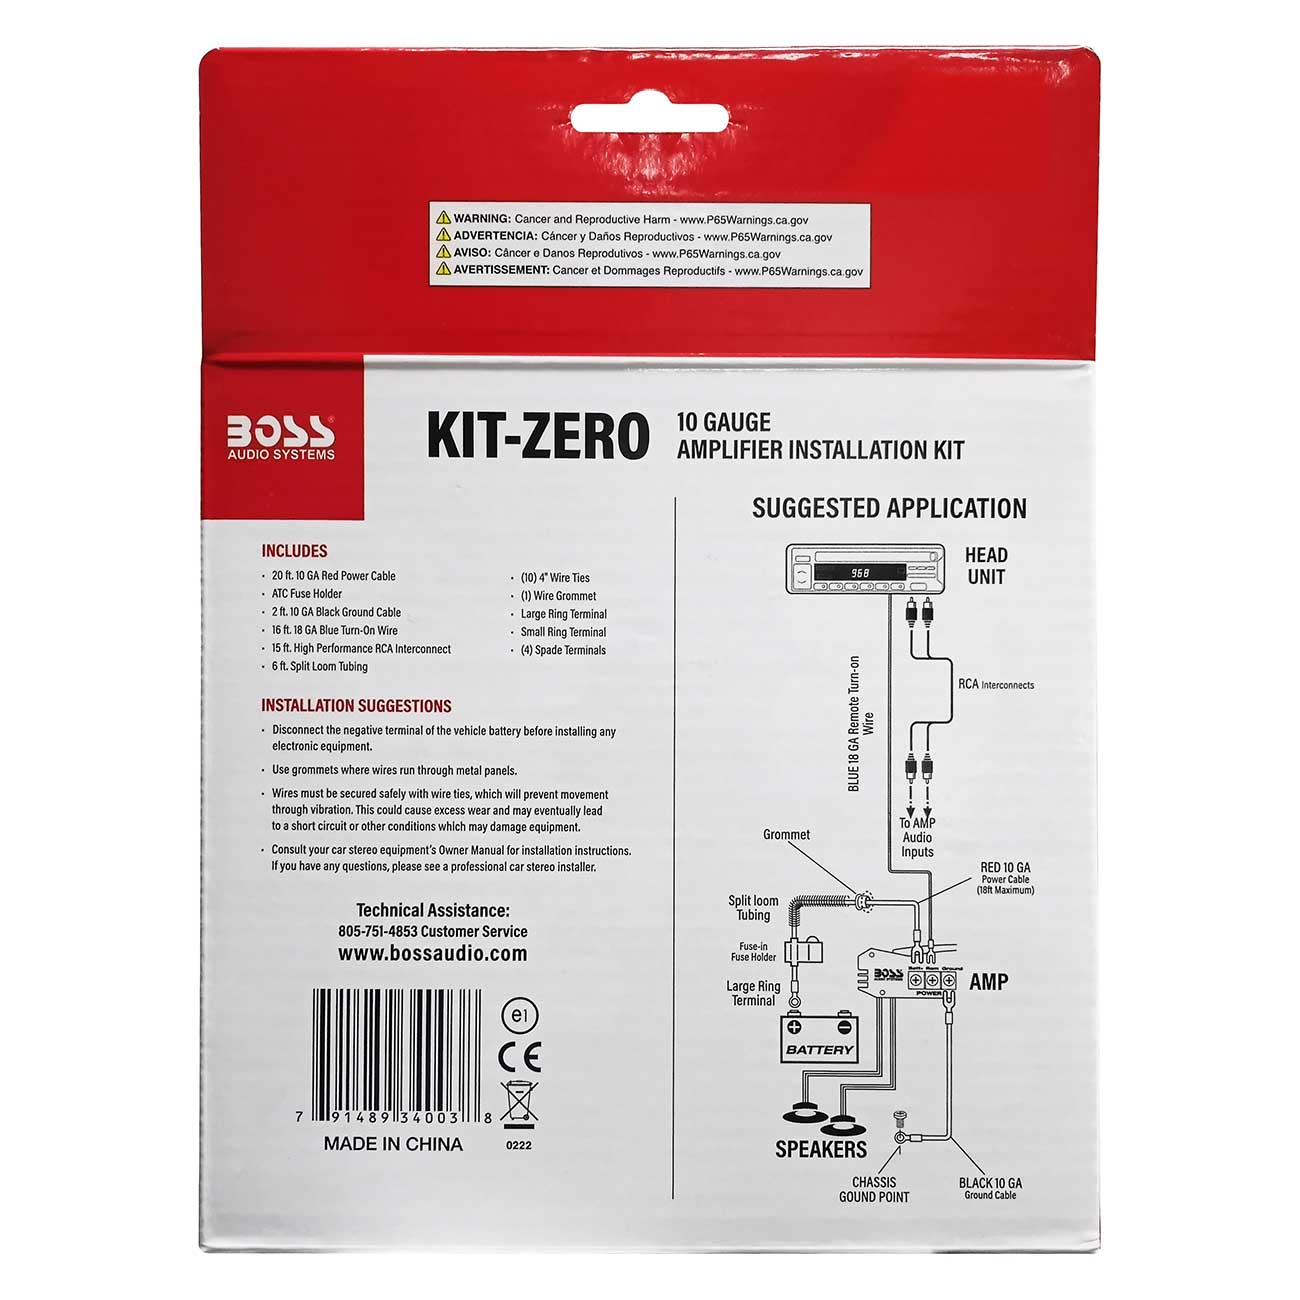 BOSS Audio Systems KIT-ZERO 10 Gauge Wiring Installation Kit for Car Amplifiers - A Car Amplifier Wiring Kit Helps You Make Connections and Brings Power to Your Radio, Subwoofers and Speakers